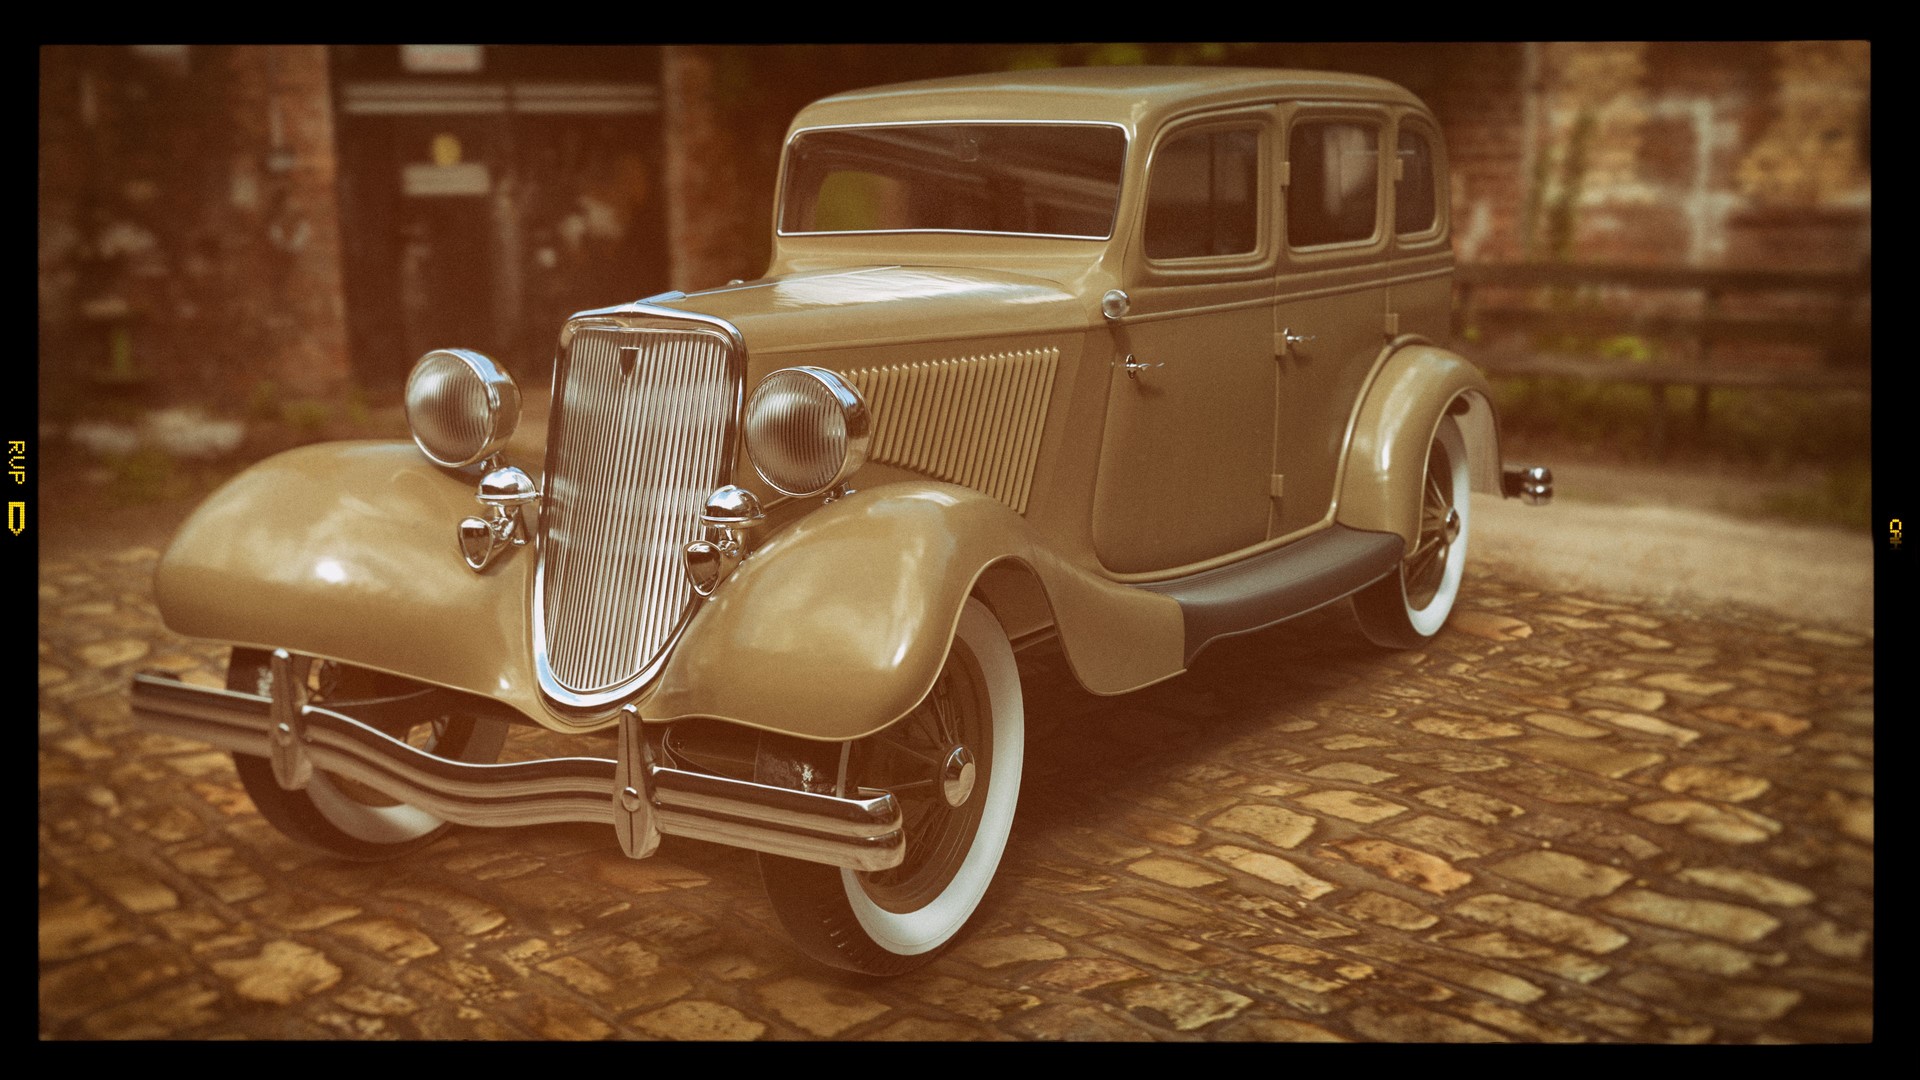 Old Bonnie Clyde Ford model